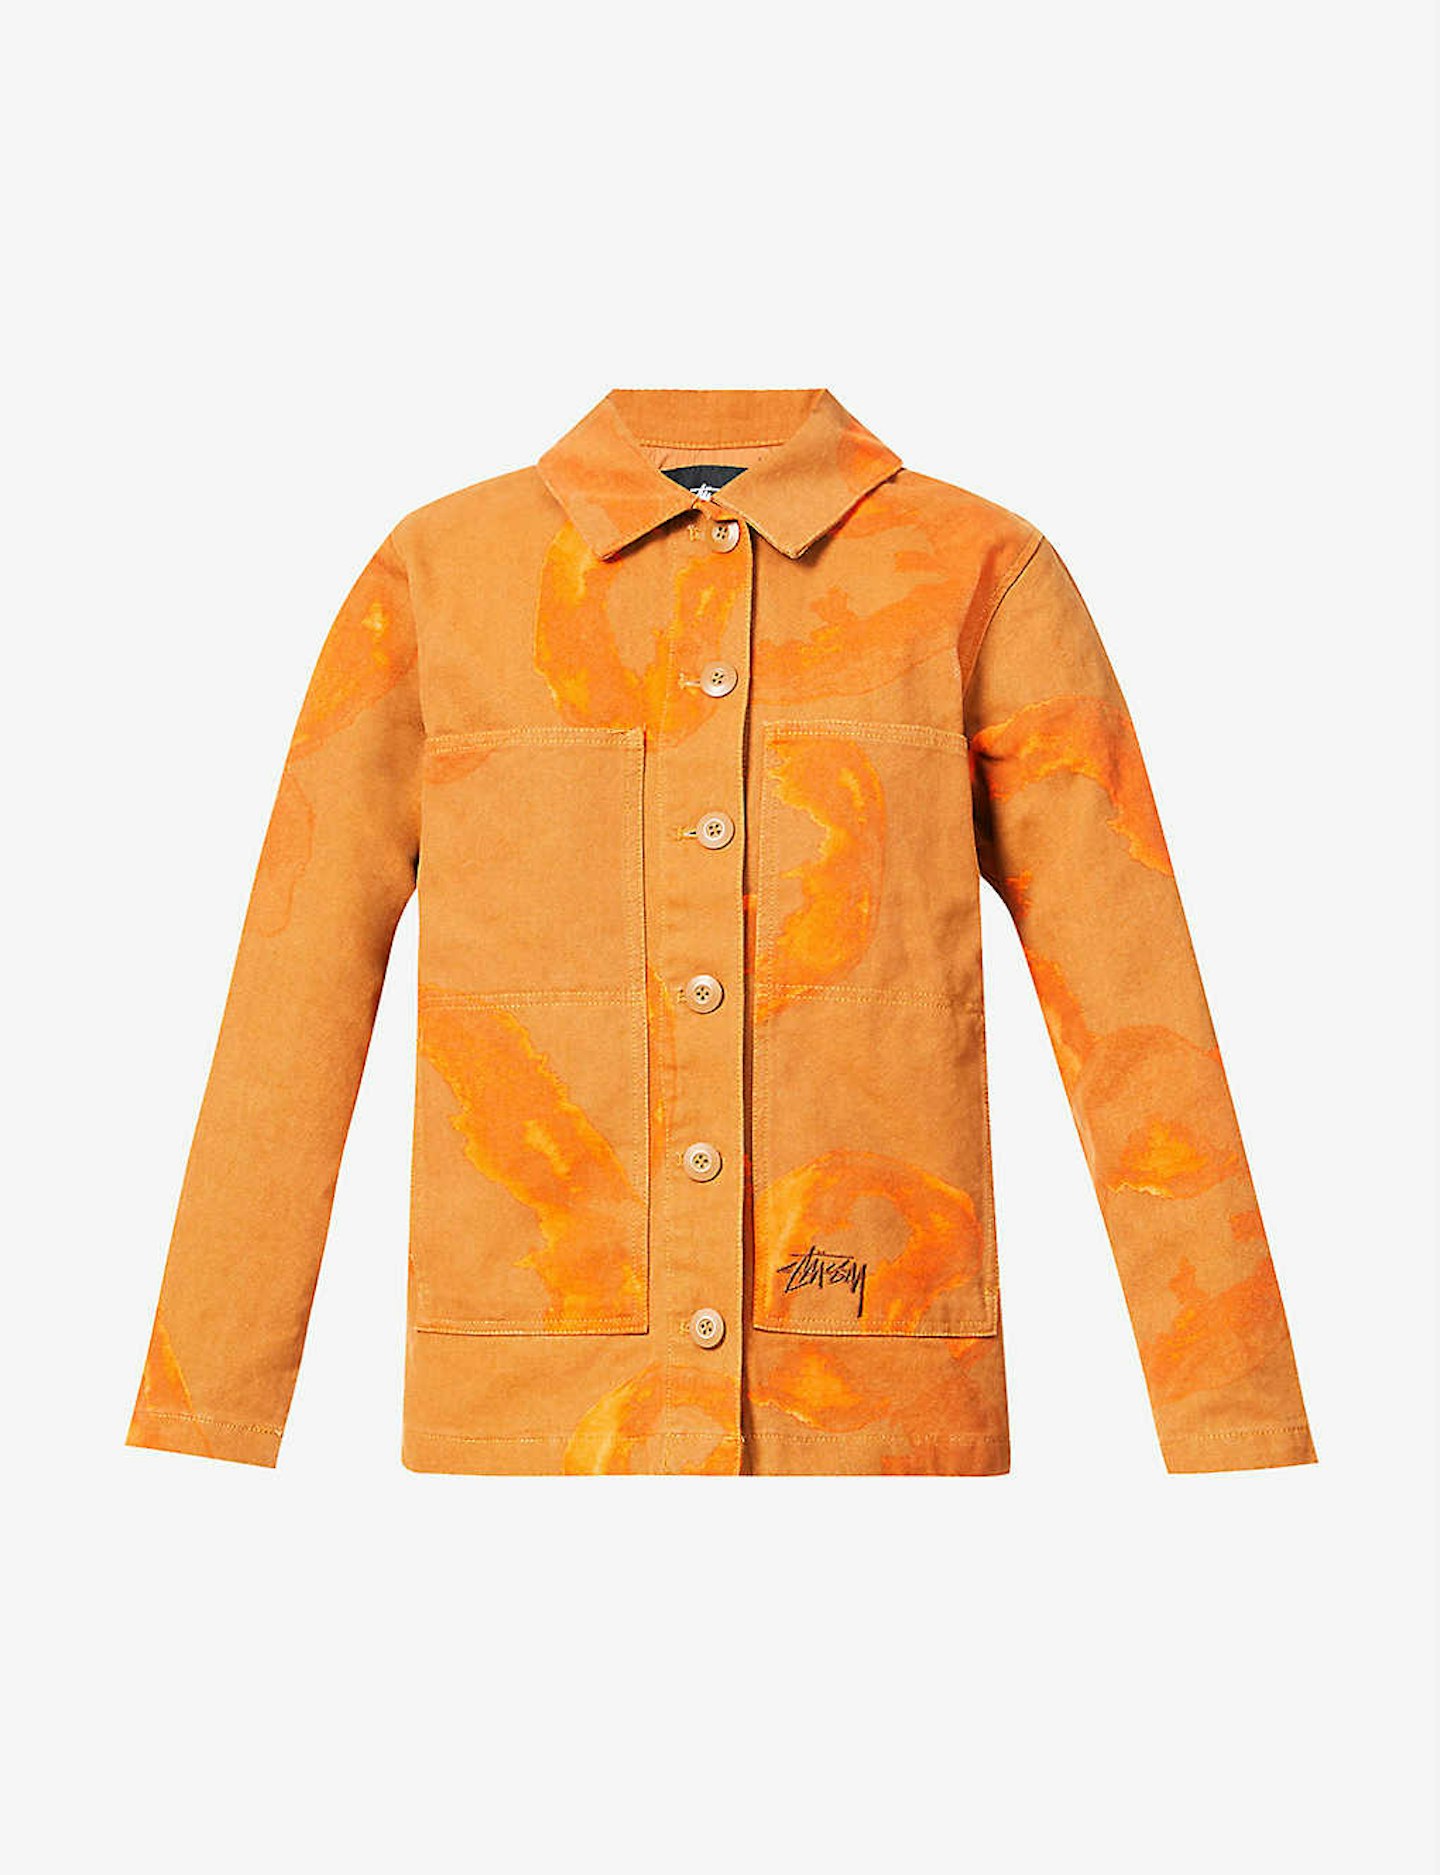 Stussy, Chore Graphic-Print Logo-Embroidered Cotton Jacket, £180